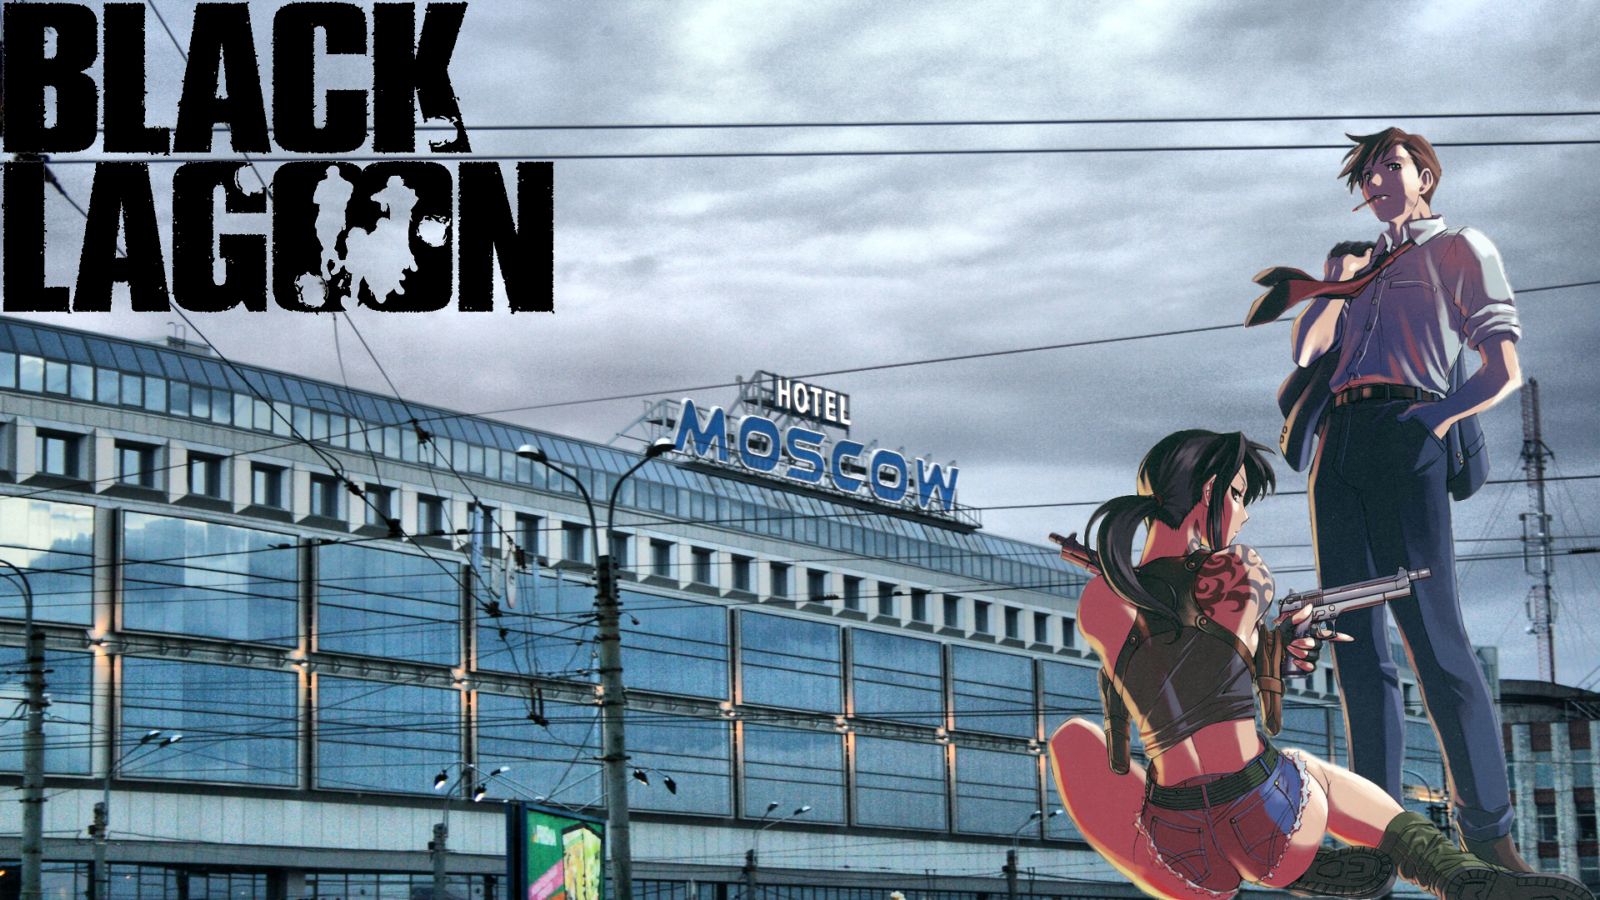 Black Lagoon free Wallpapers 55 photos for your desktop